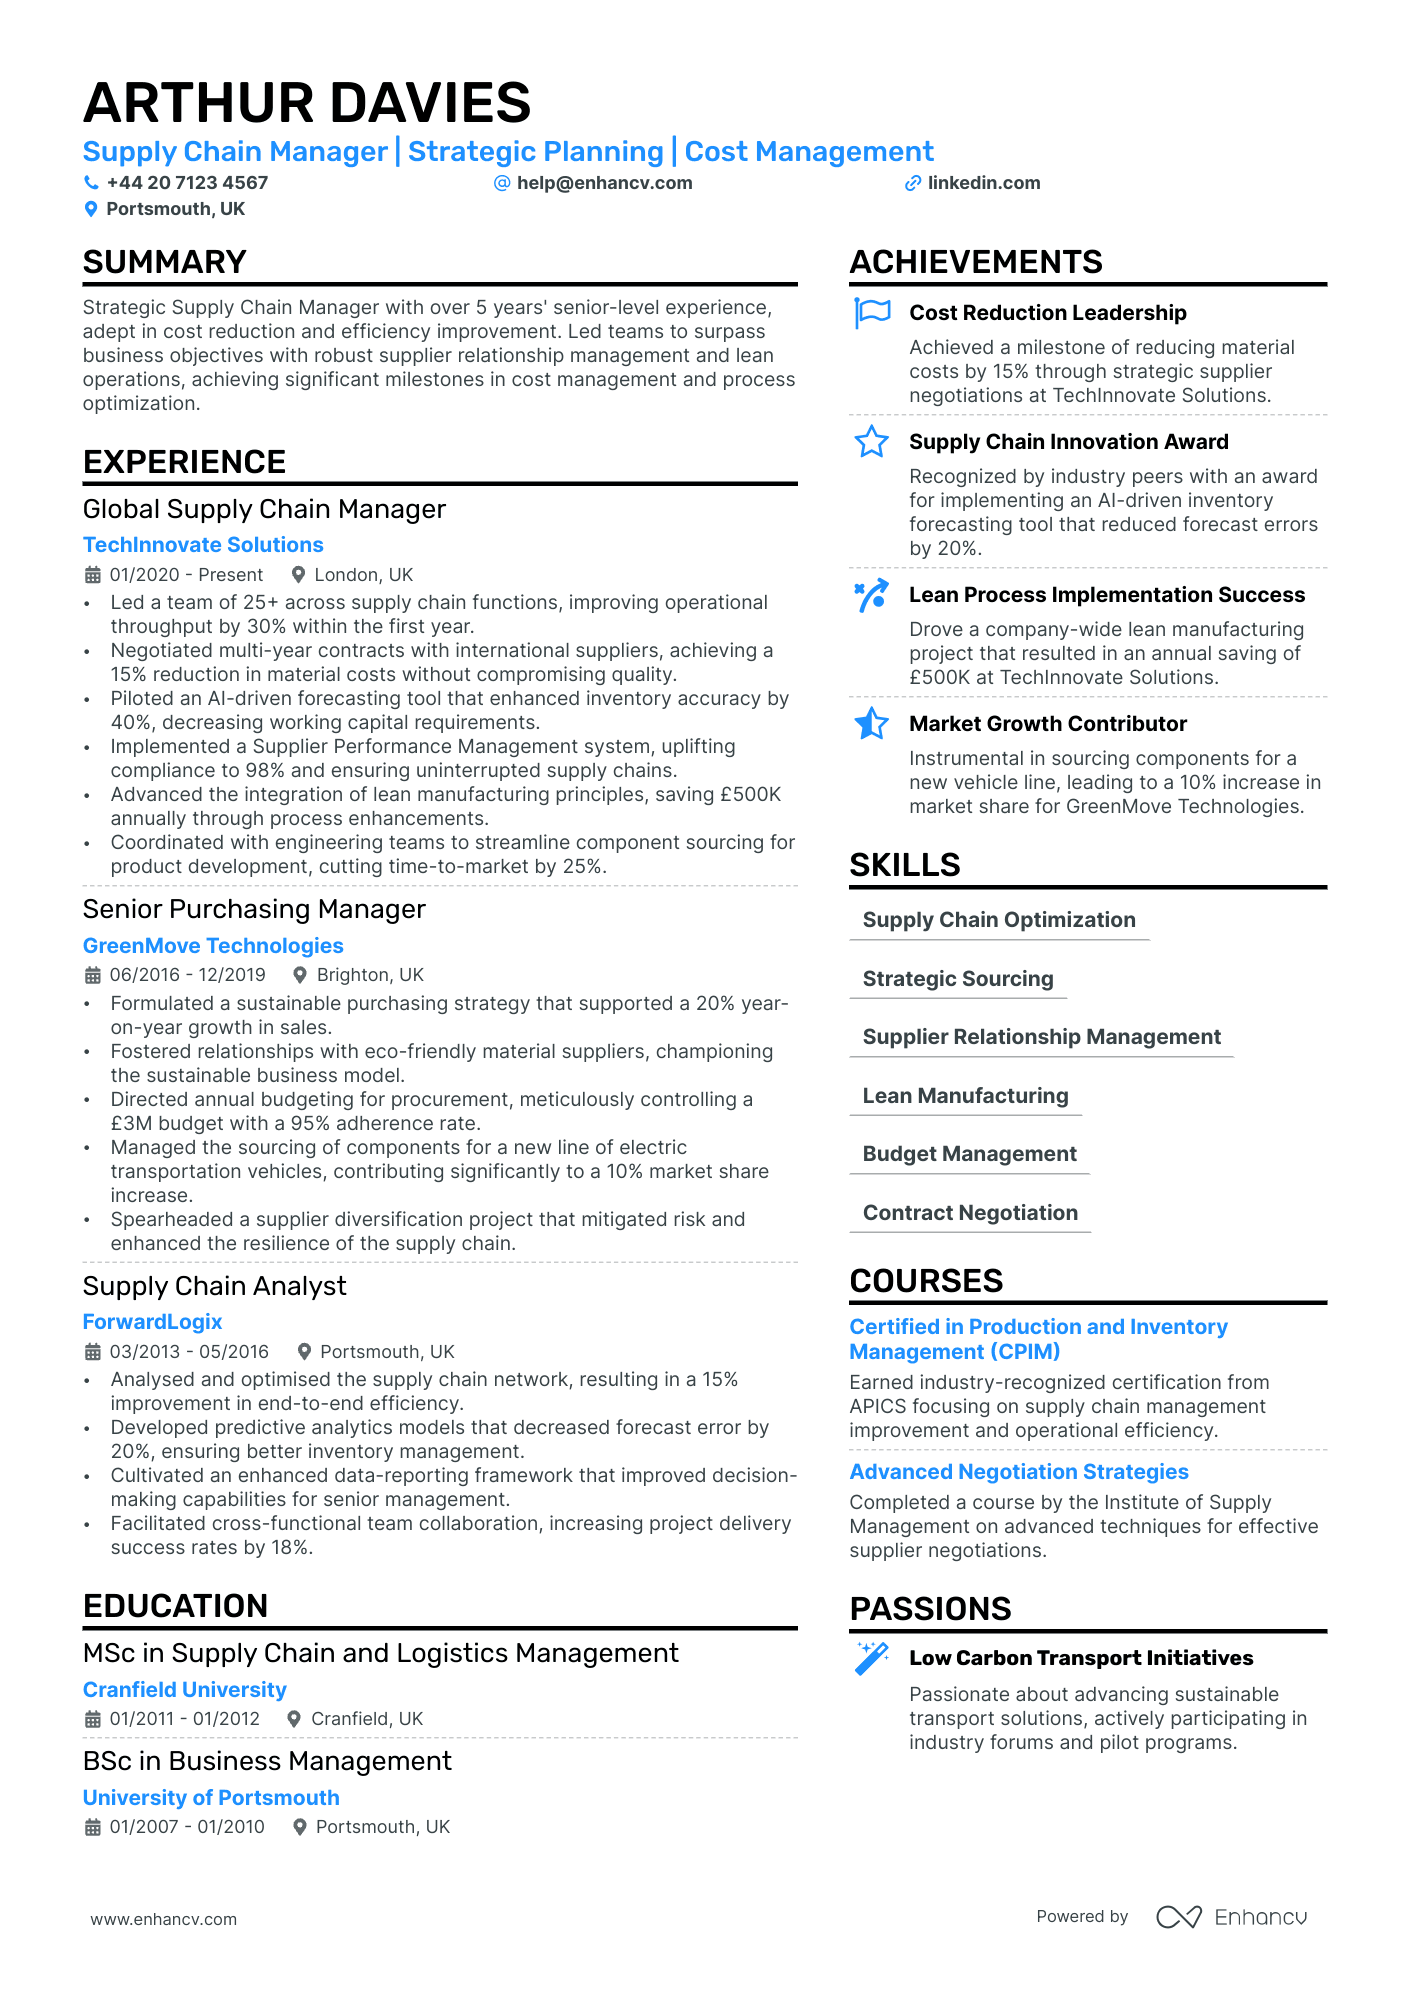 Supply Chain Manager cv example